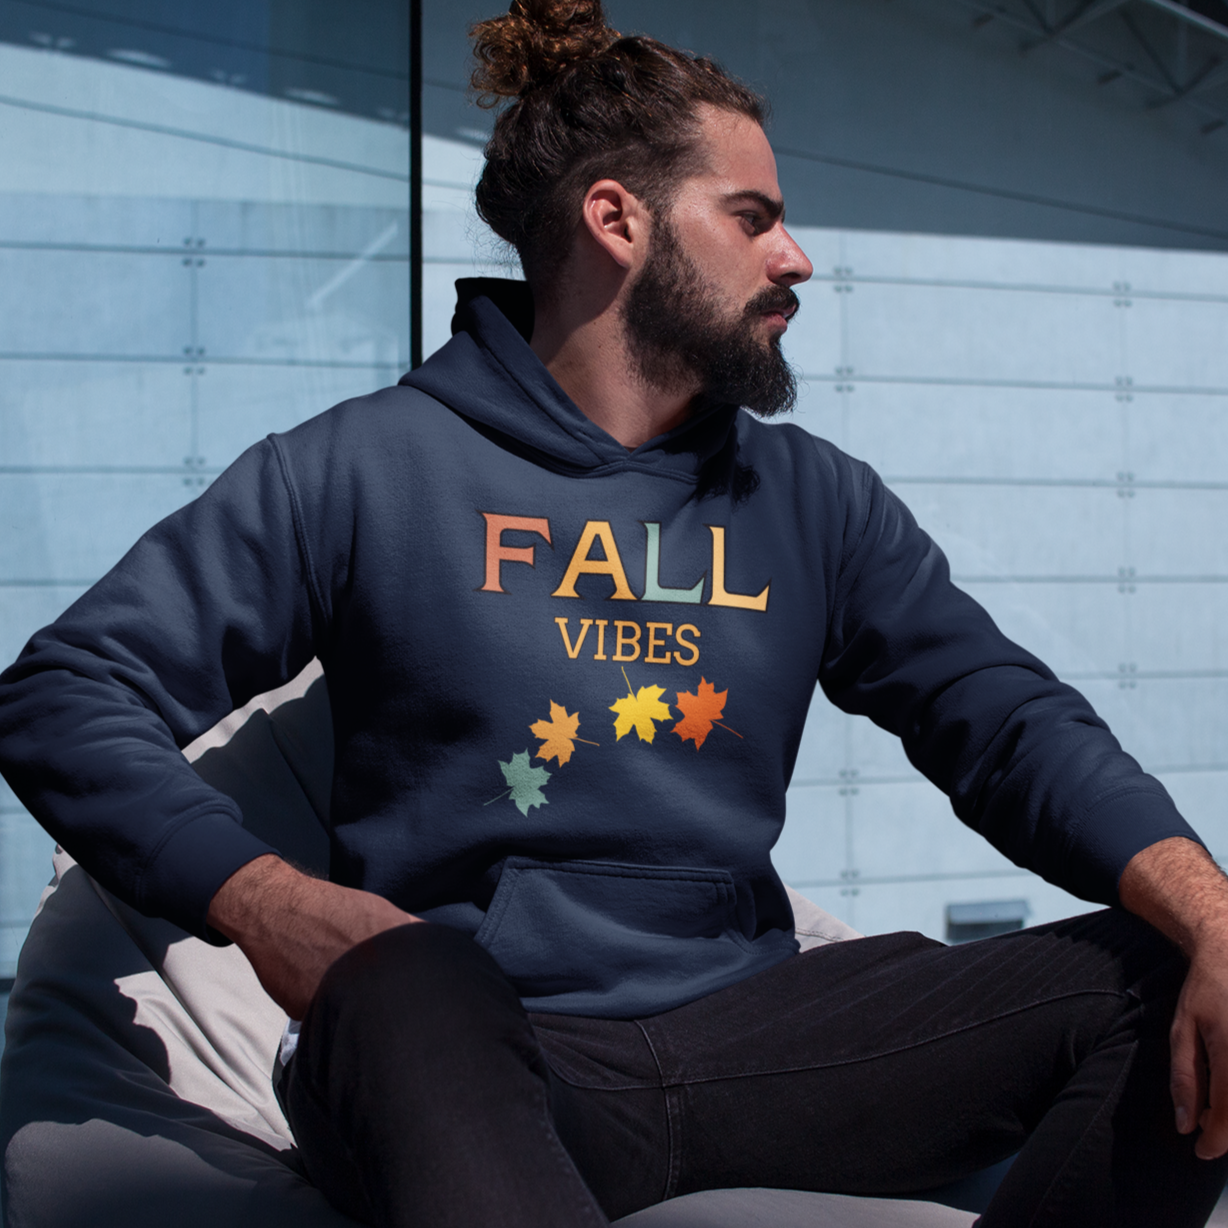 Fall Vibes - Unisex Pullover Hoodie